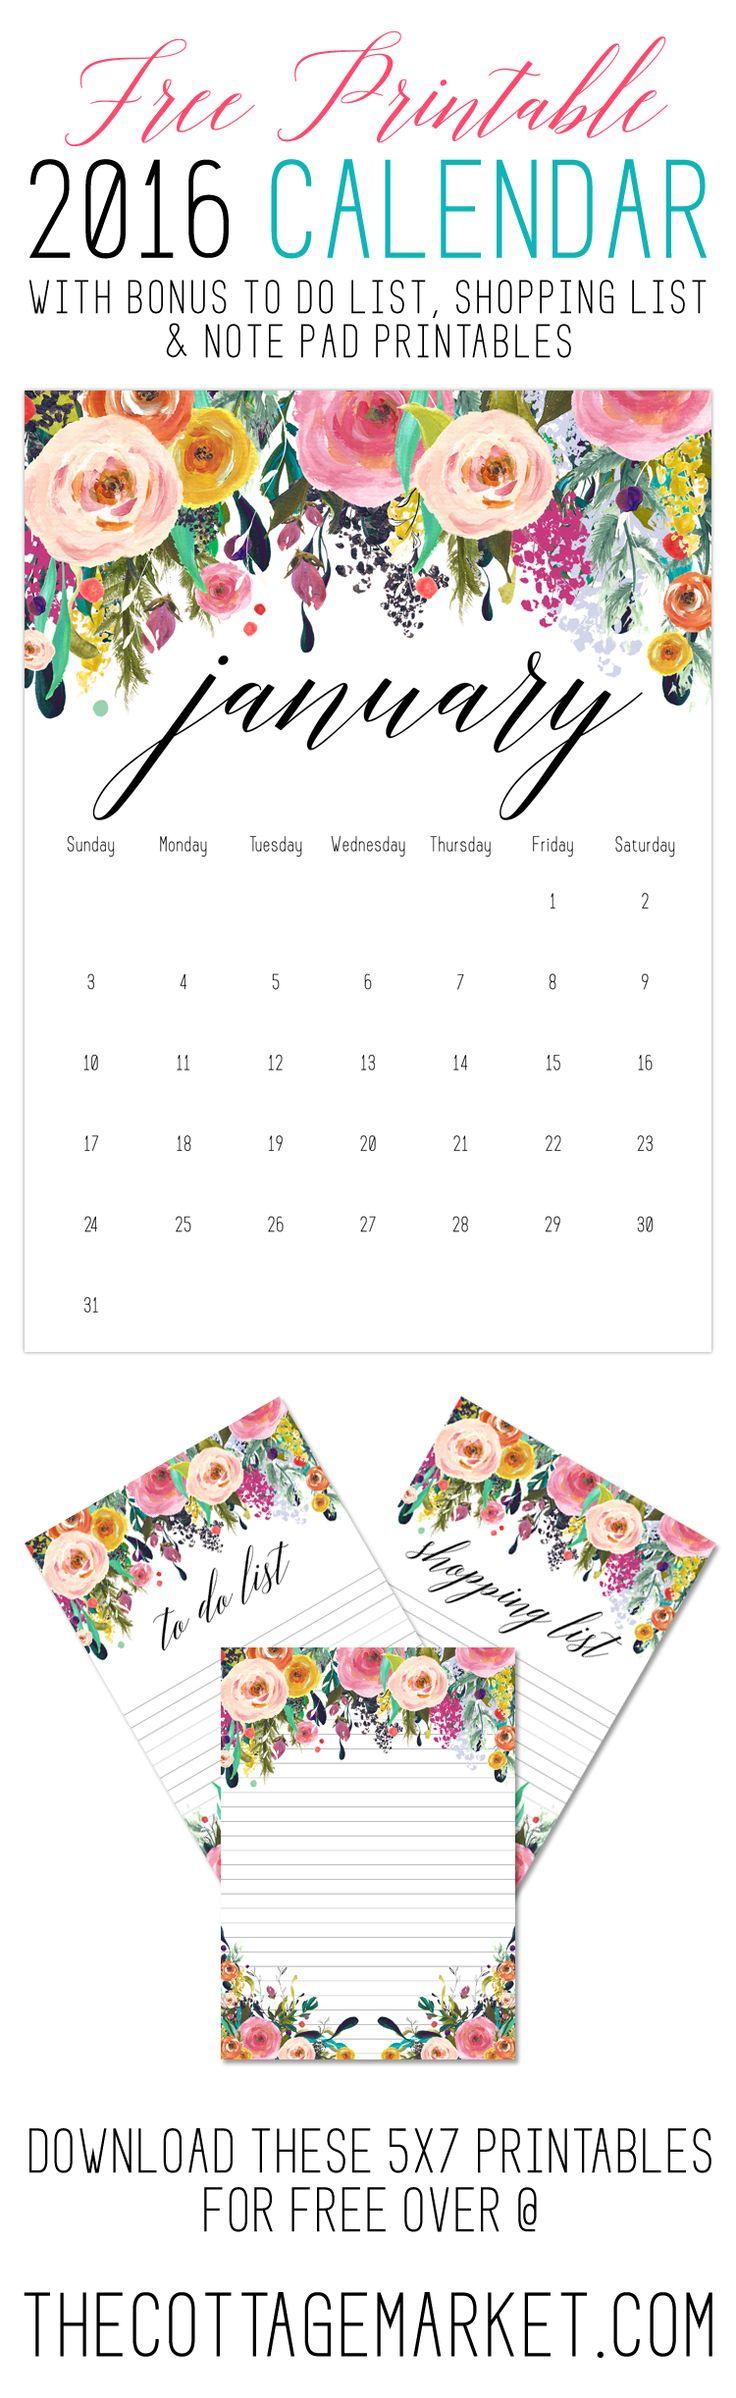 Mariage - Free Printable 2016 Calendar /// With Bonus Free To Do List, Shopping List & Note Pad Printables - The Cottage Market